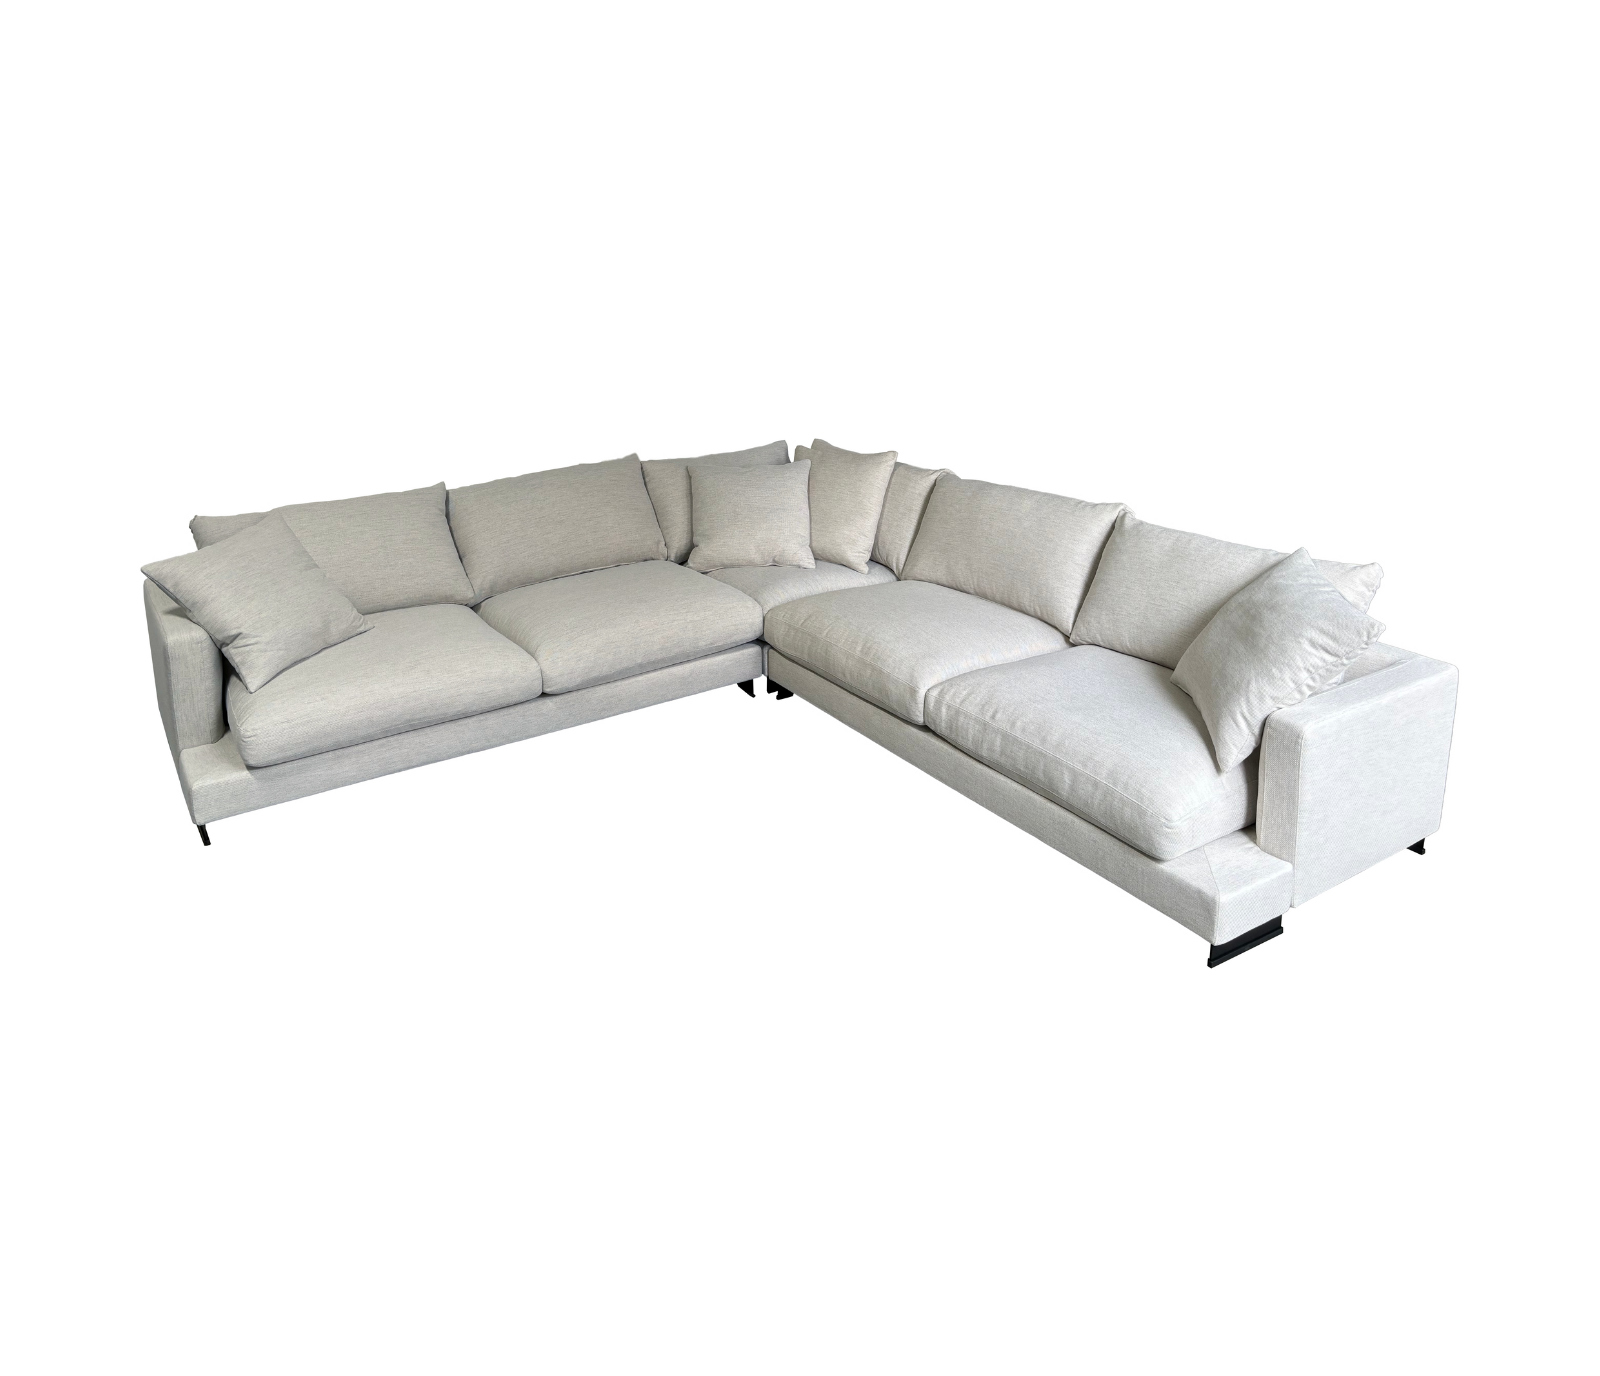 Weekender 3 Piece Sectional - Ivory Fabric